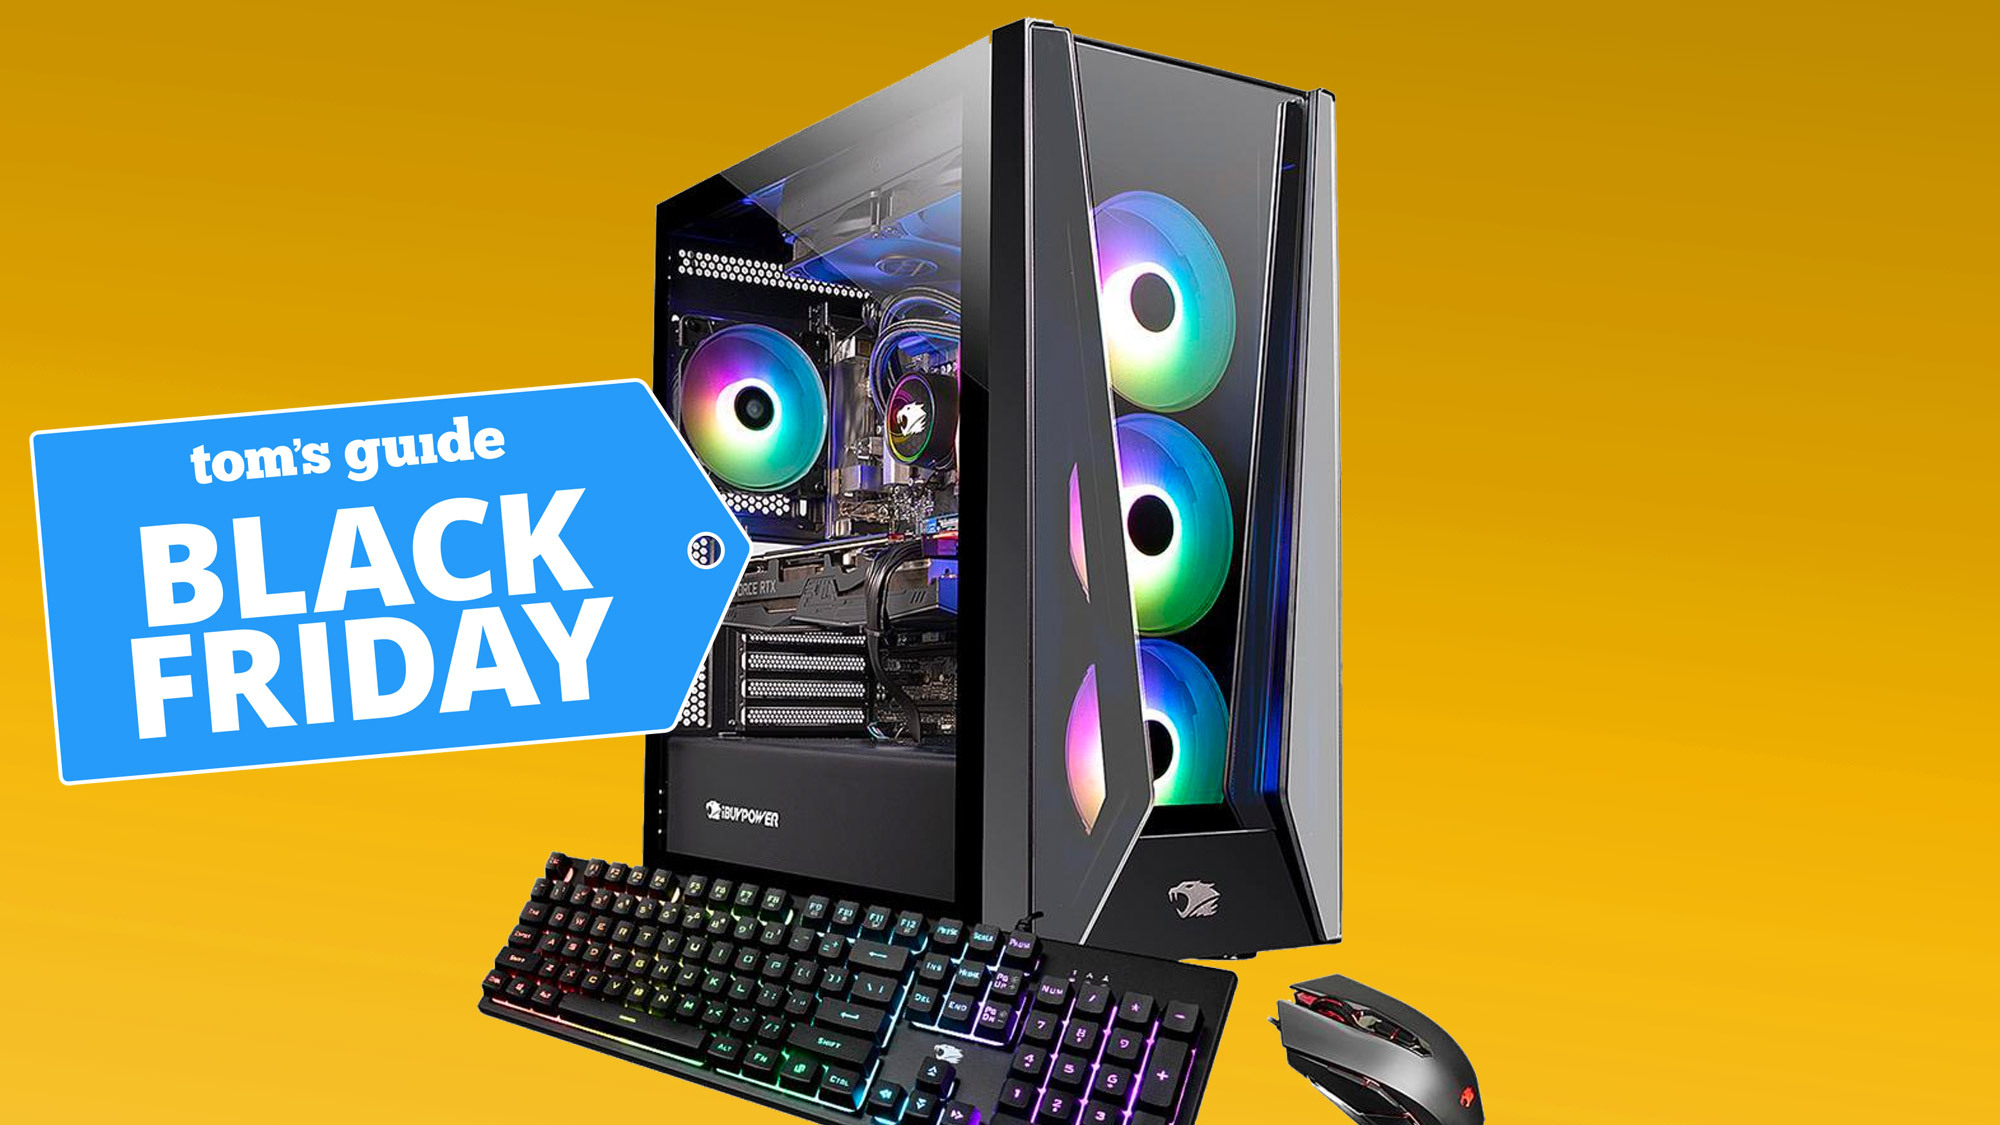 Damn, this Black Friday gaming PC deal at Best Buy might just be the best I’ve ever seen for under $900